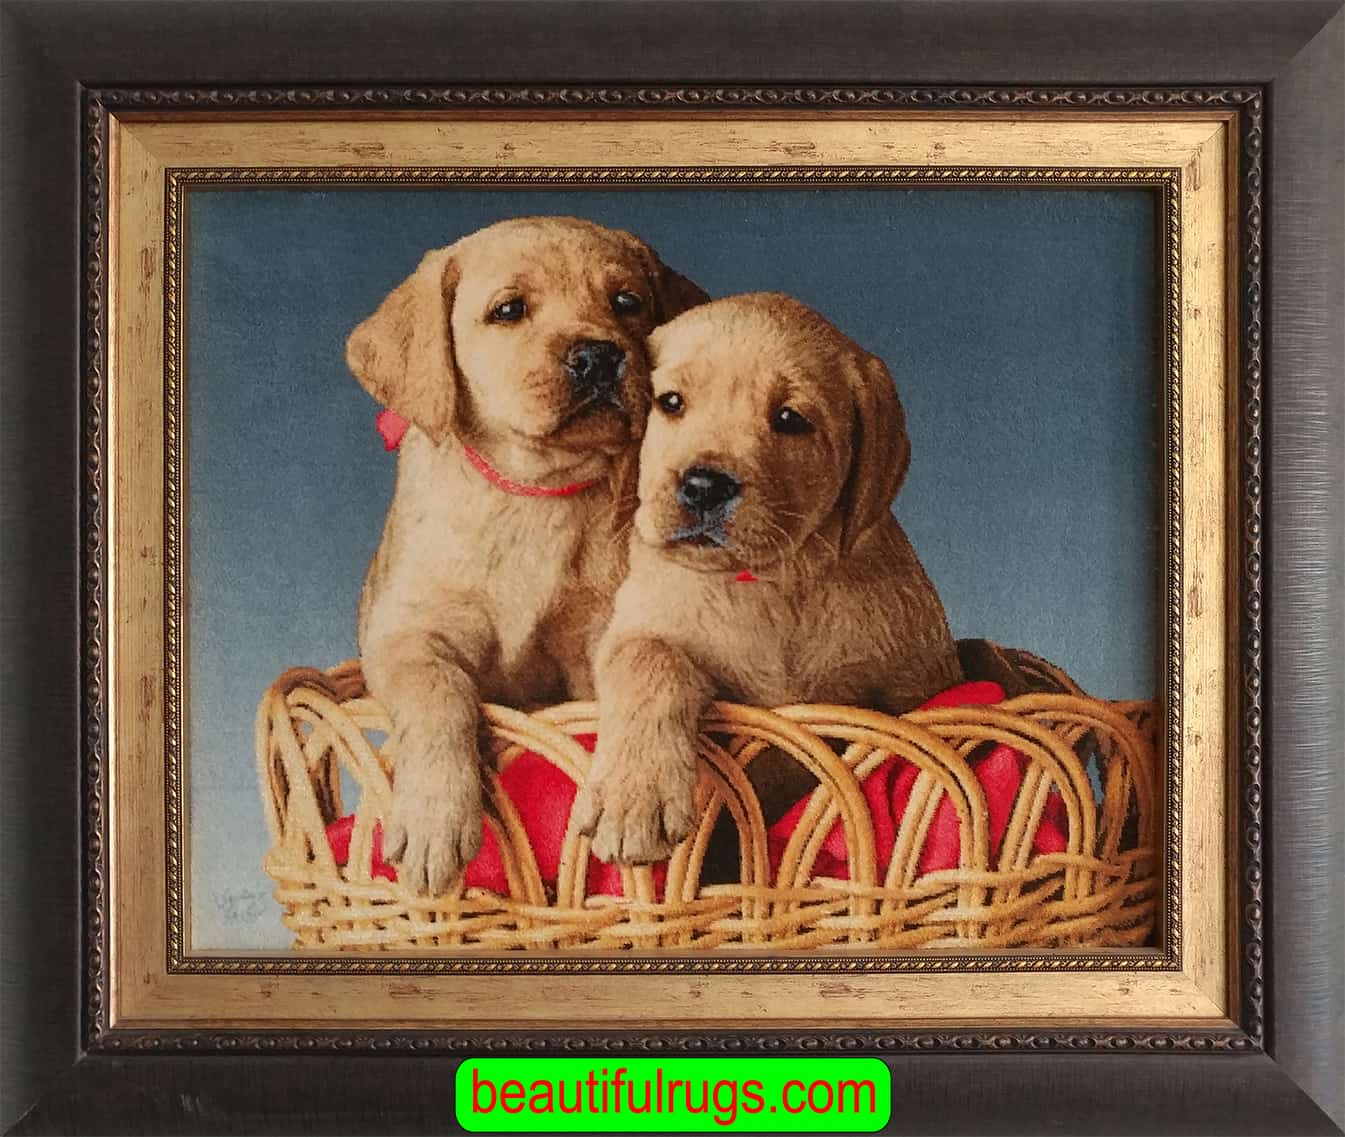 Pictorial Rugs, A Cute Handmade Persian Pictorial Rug For Dog Lovers, two dogs are sitting in a basket. The rug is framed. Size 2x1.8